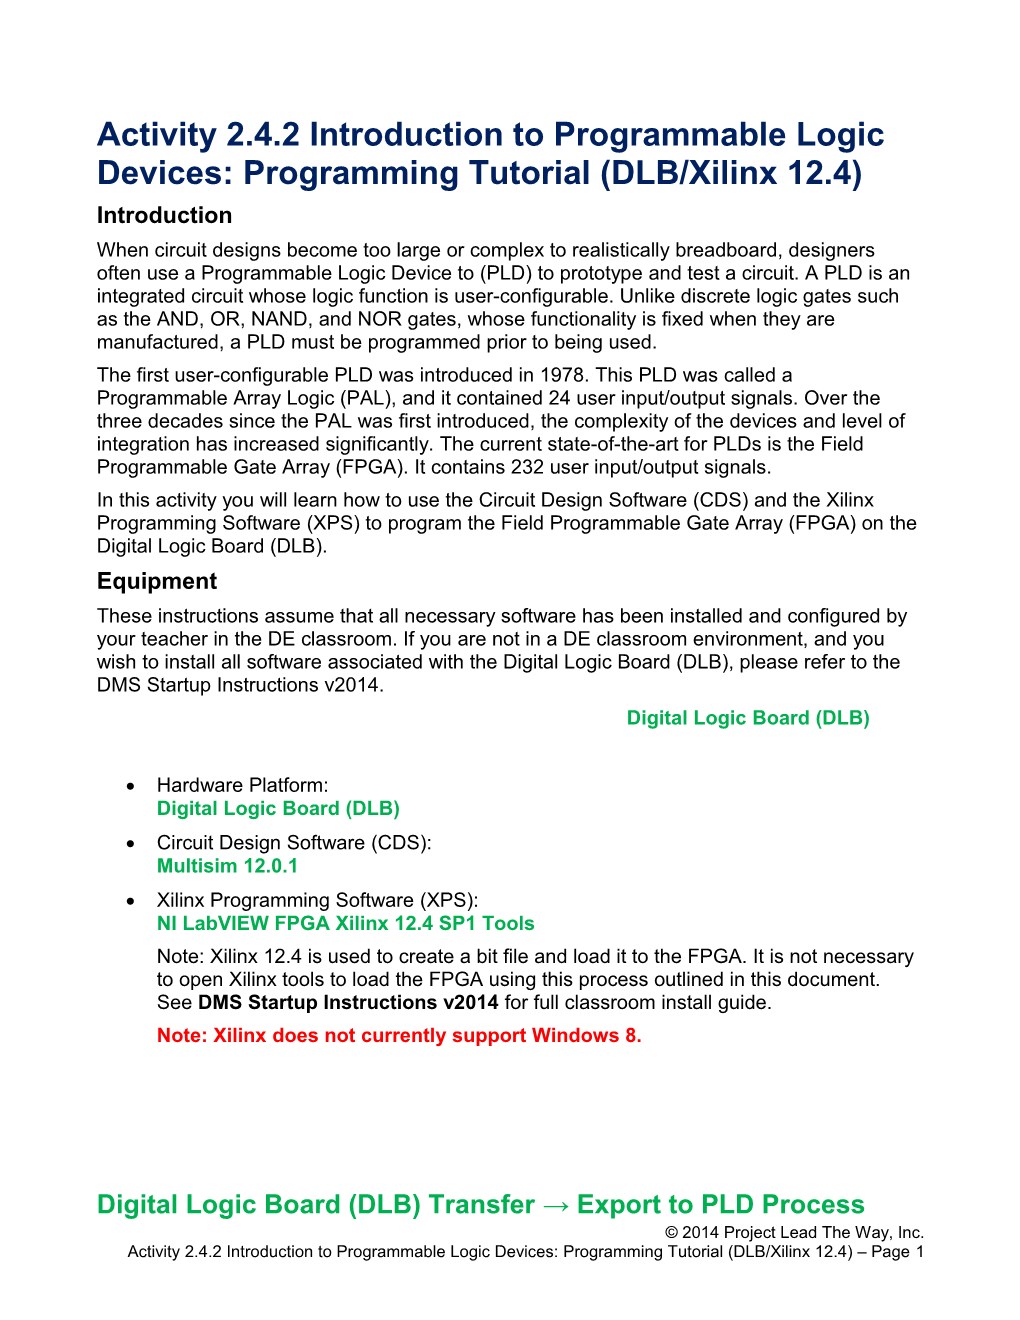 Activity 2.4.2 Introduction to Programmable Logic Devices: Programming Tutorial (DLB/Xilinx